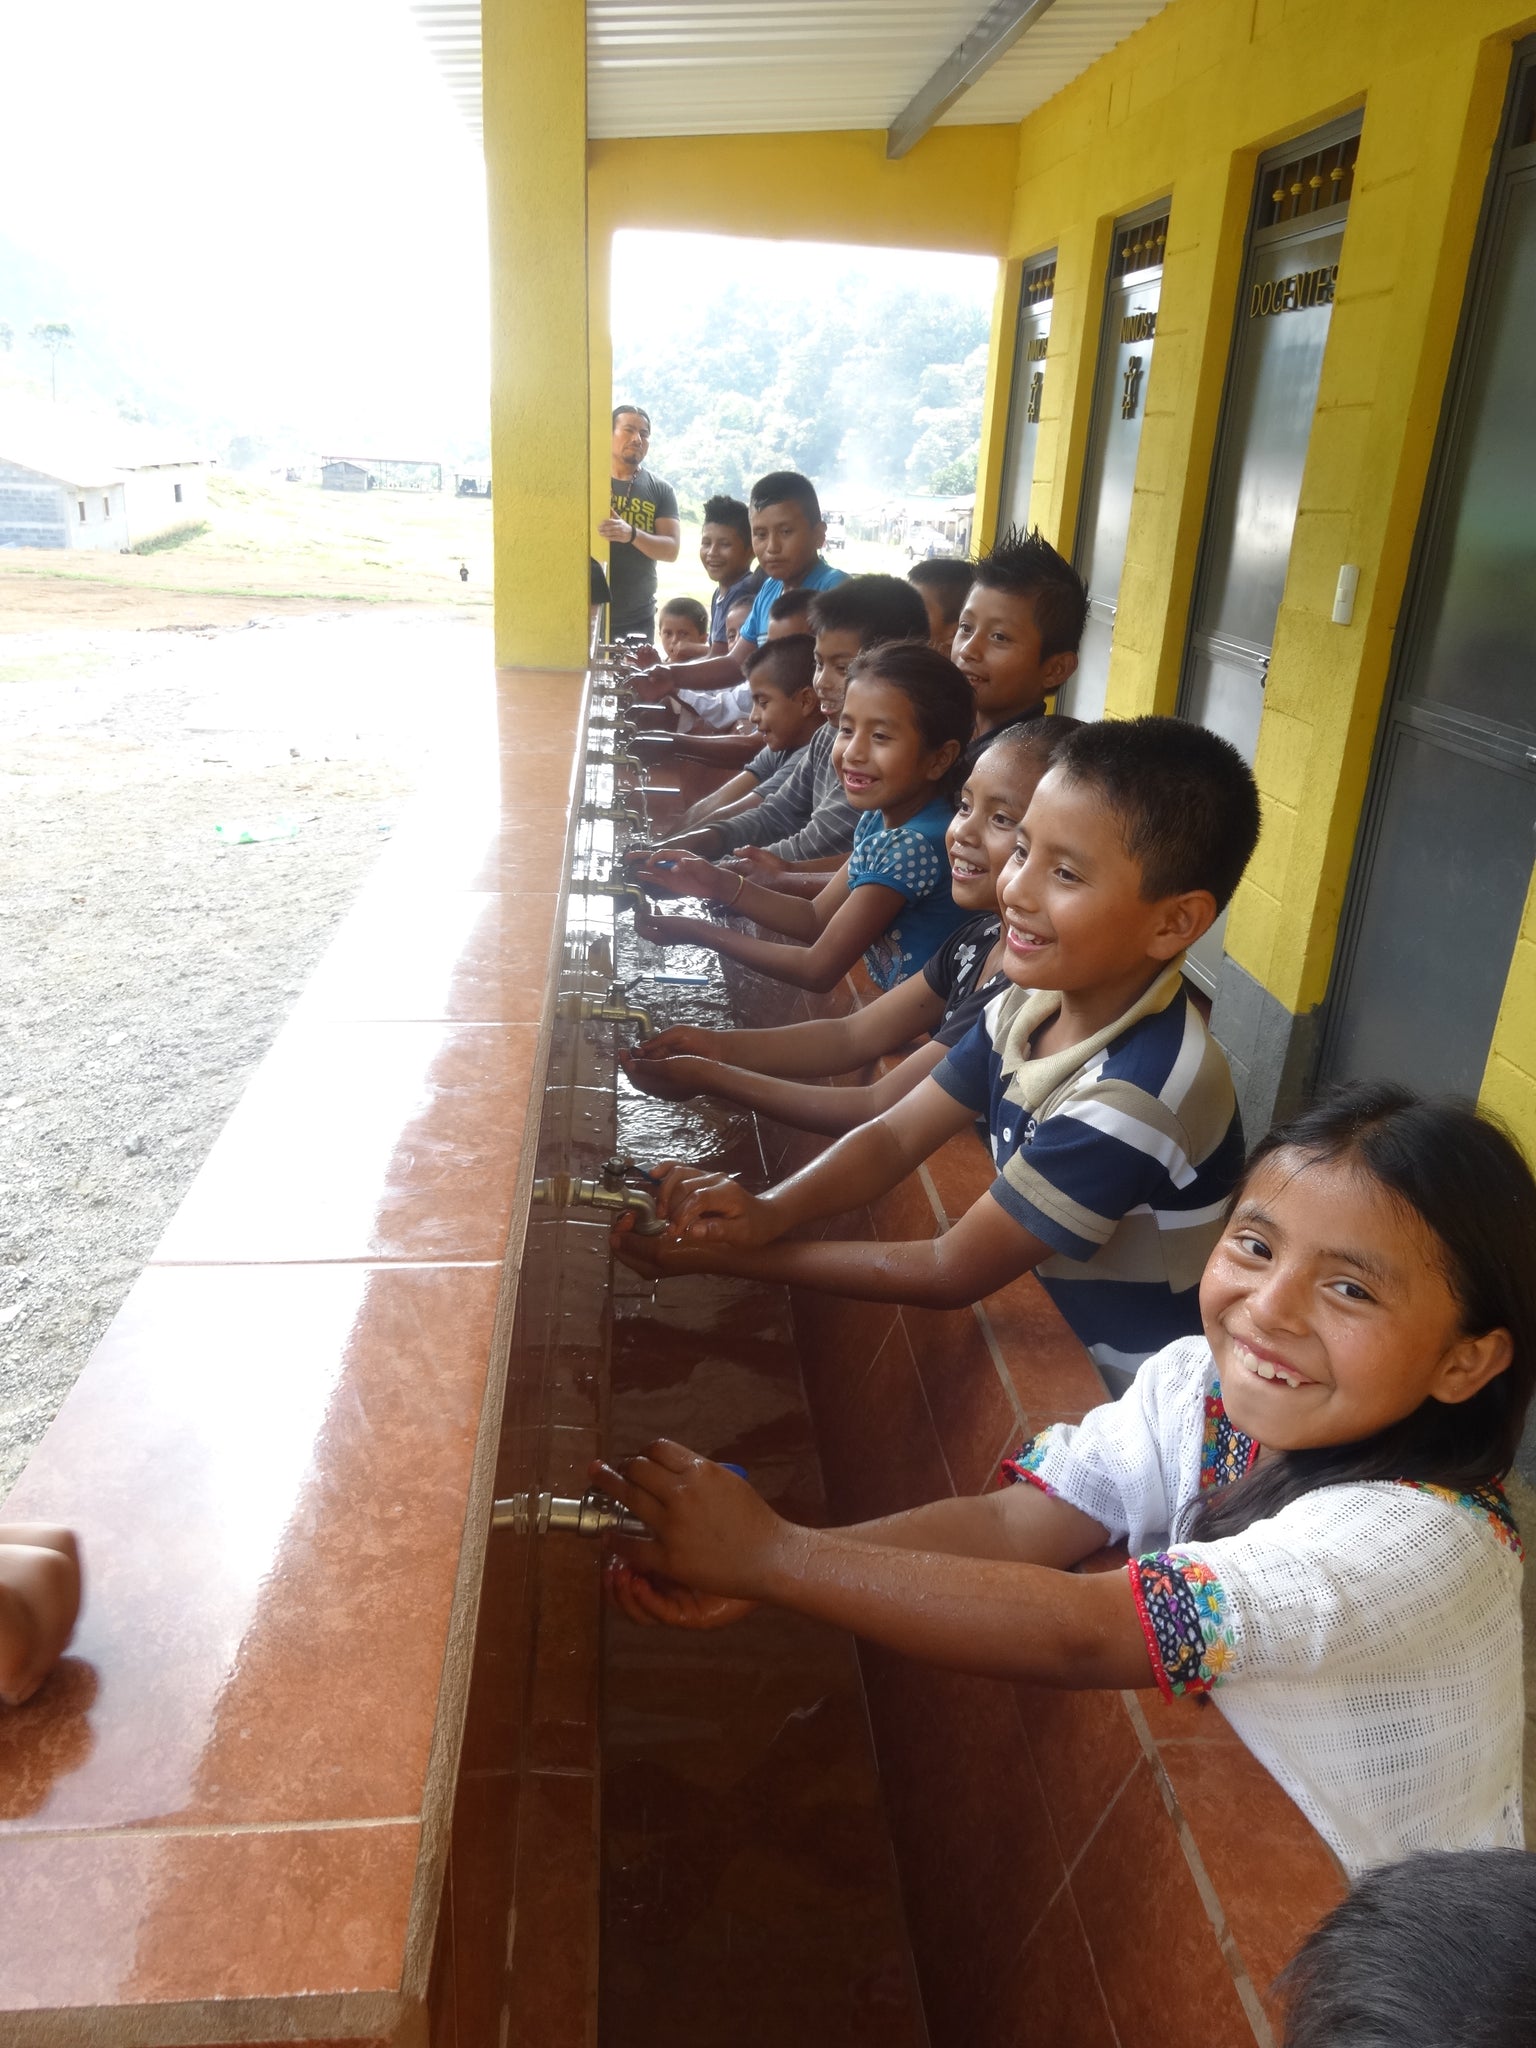 Students happily washing their hands at the new lavamanos